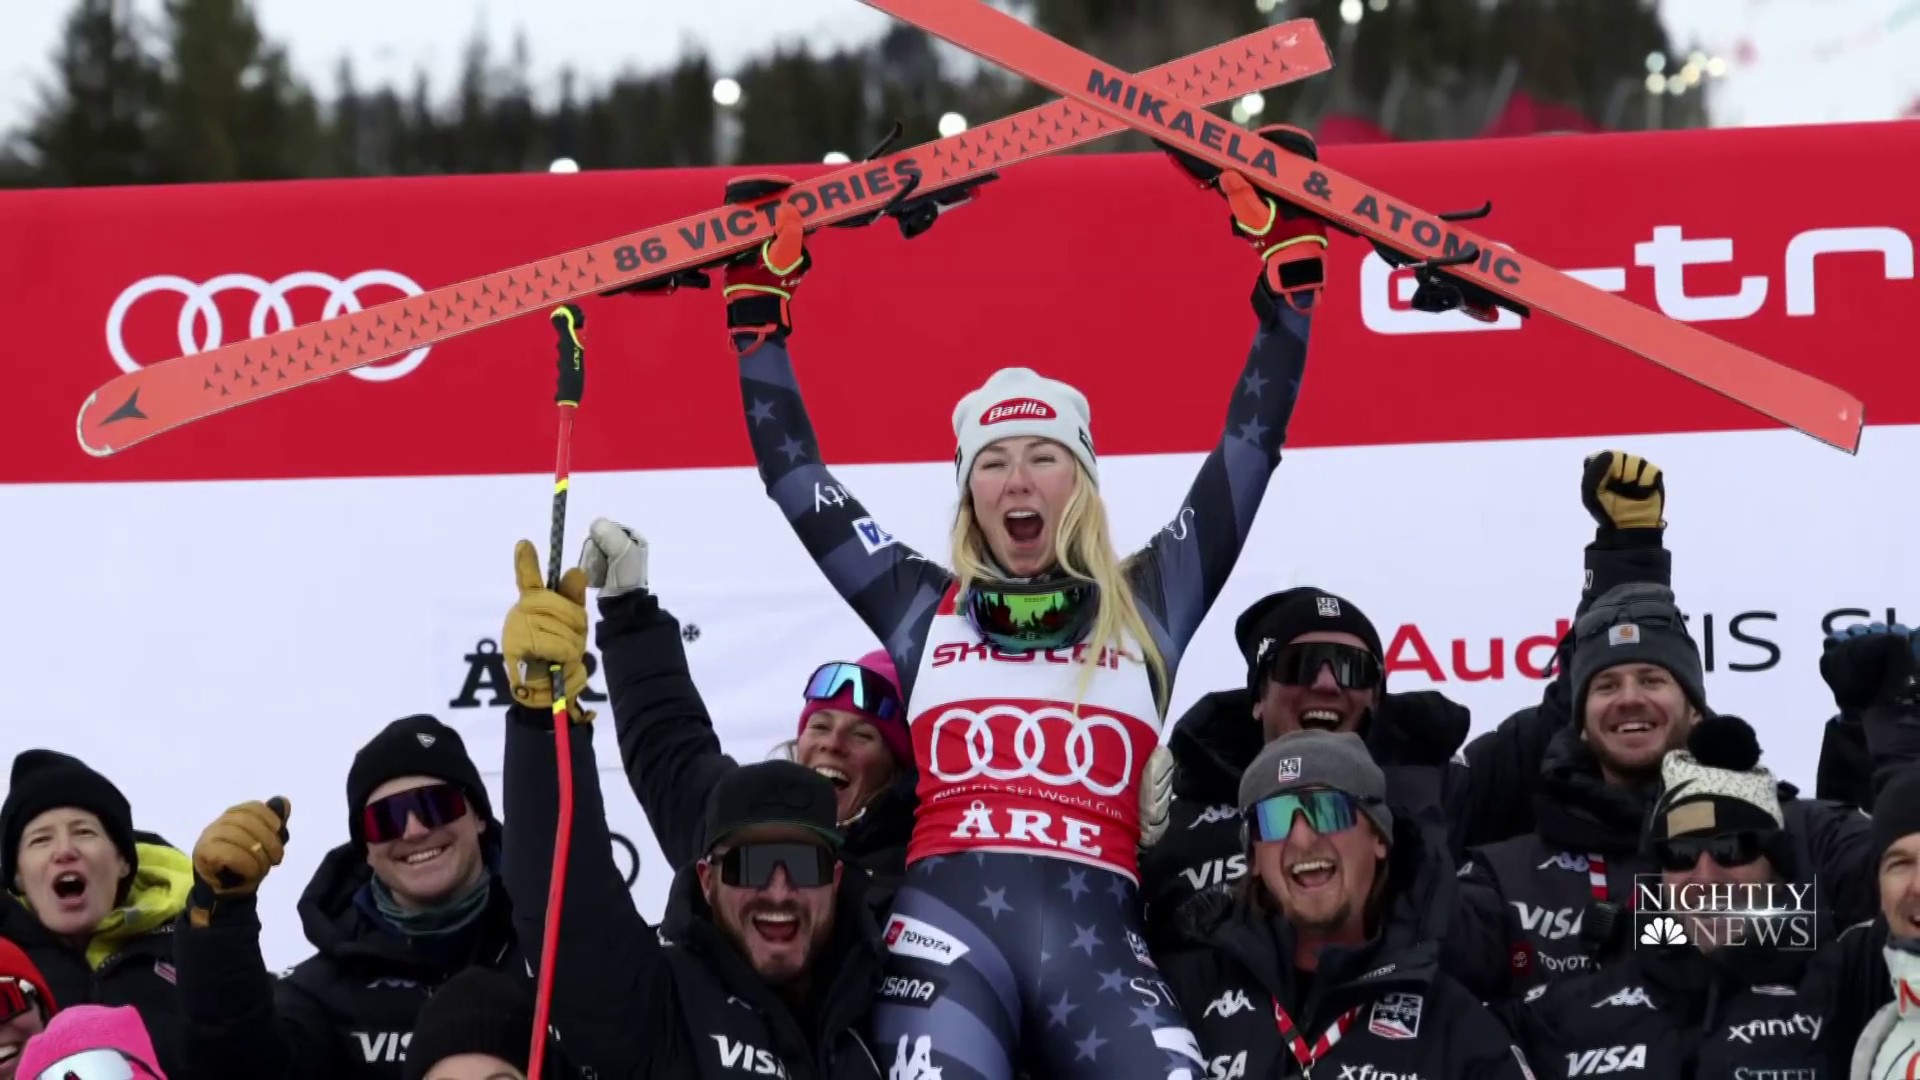 Mikaela Shiffrin sets World Cup skiing record with 87th win